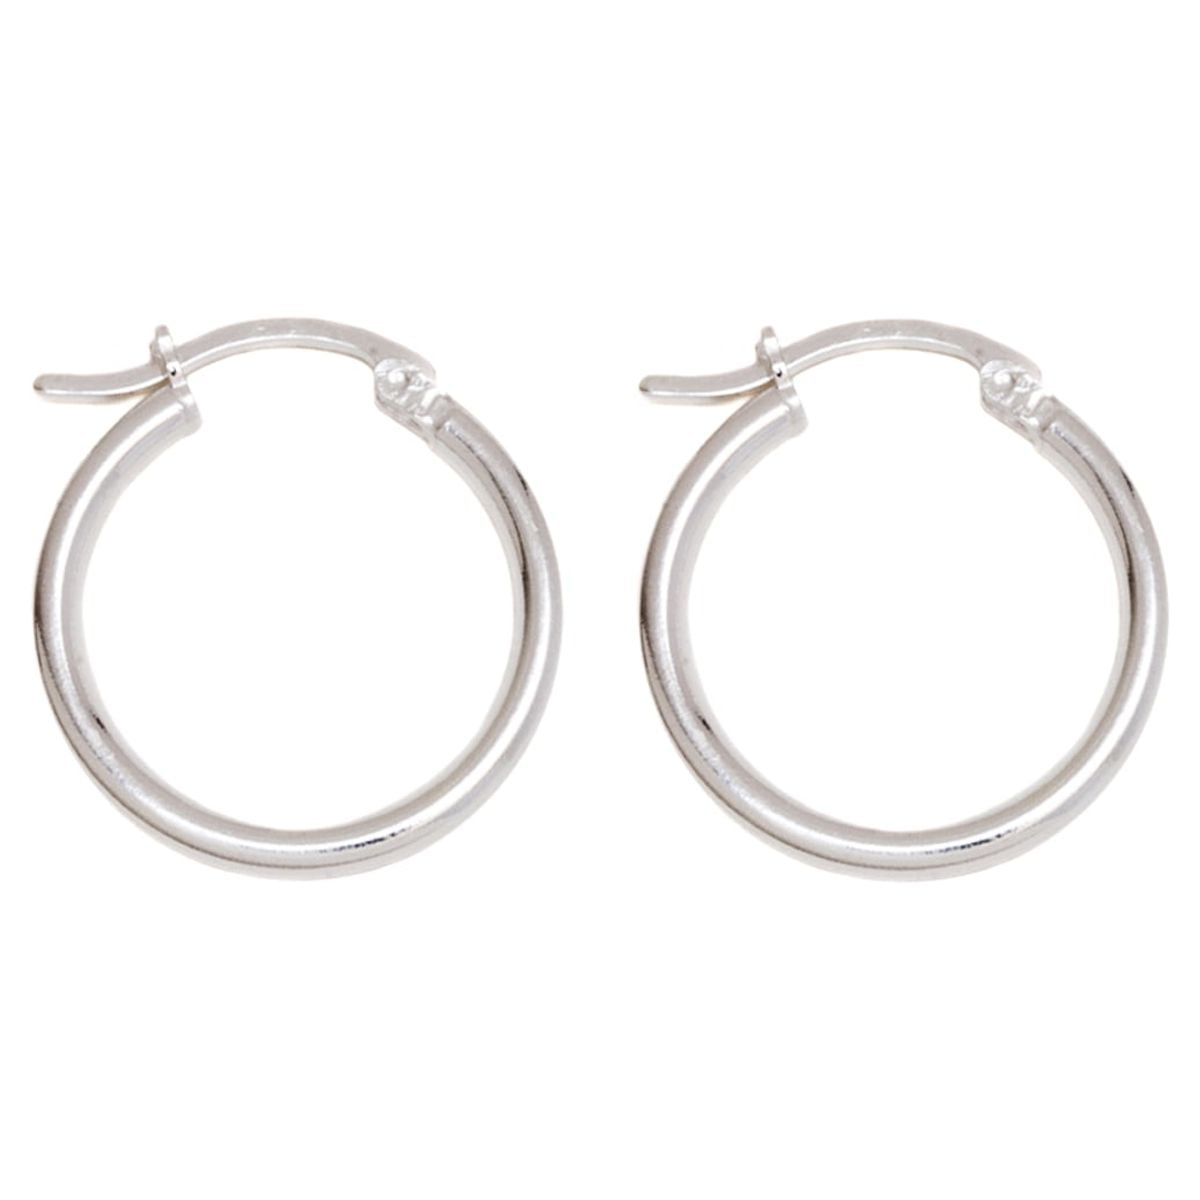 Small Sterling Silver Hoop Earrings | Small silver hoop earrings, Small silver  earrings, Hoop earrings small